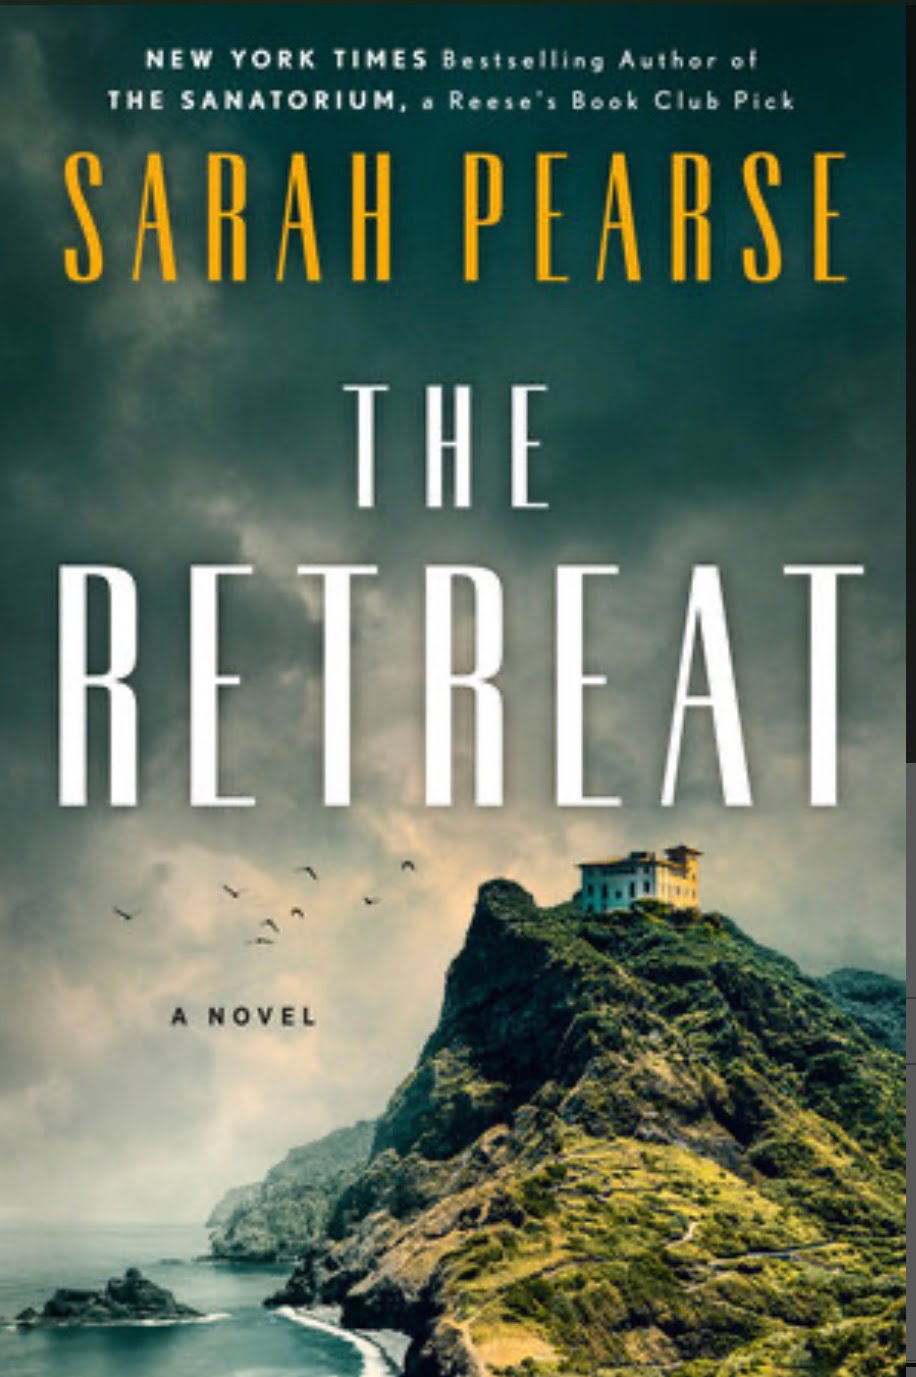 THE RETREAT BY SARAH PEARSE – BOOK REVIEW